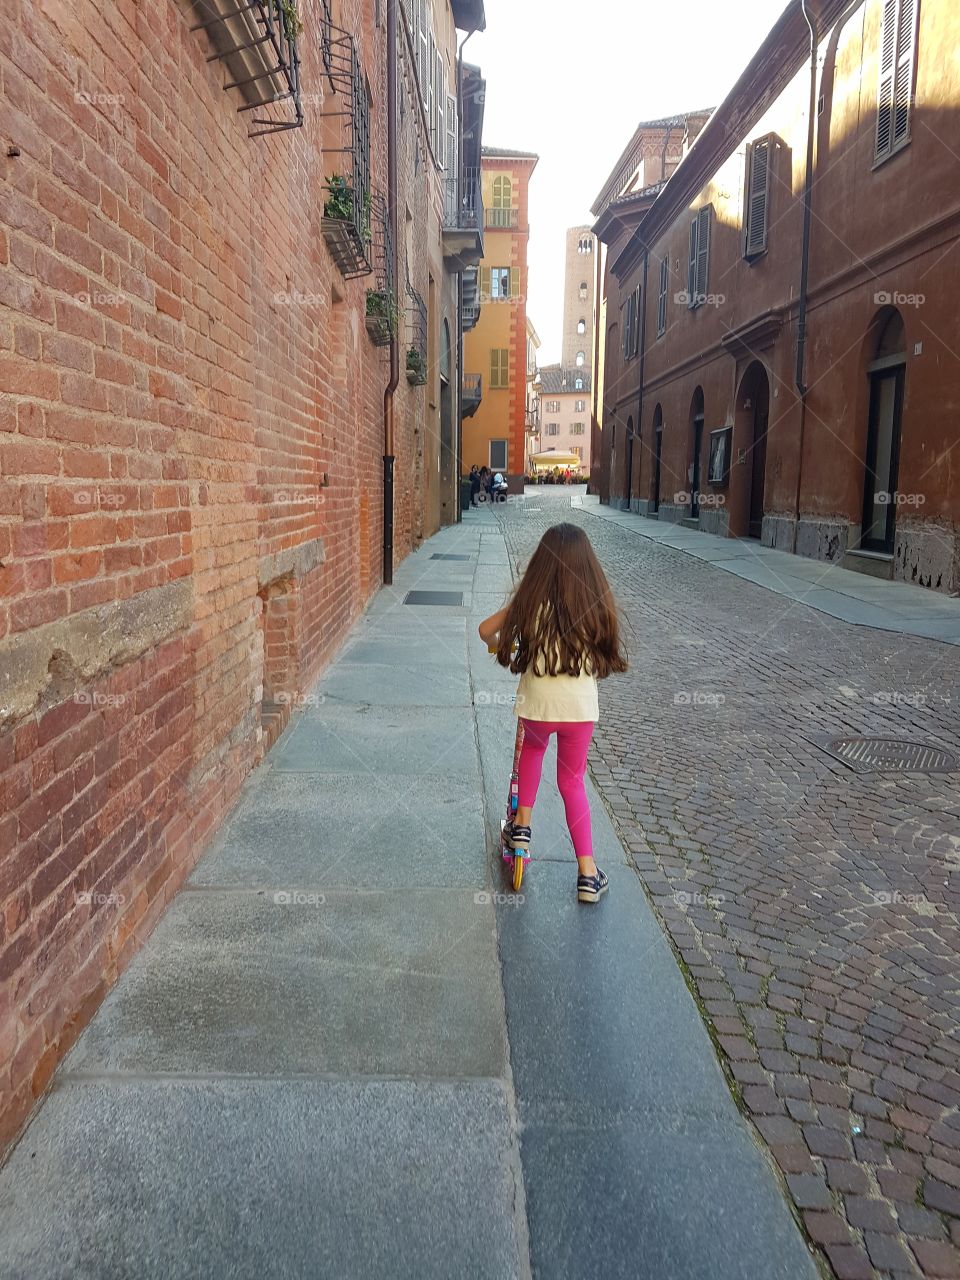 Little girl playing with a skate in a italian city street